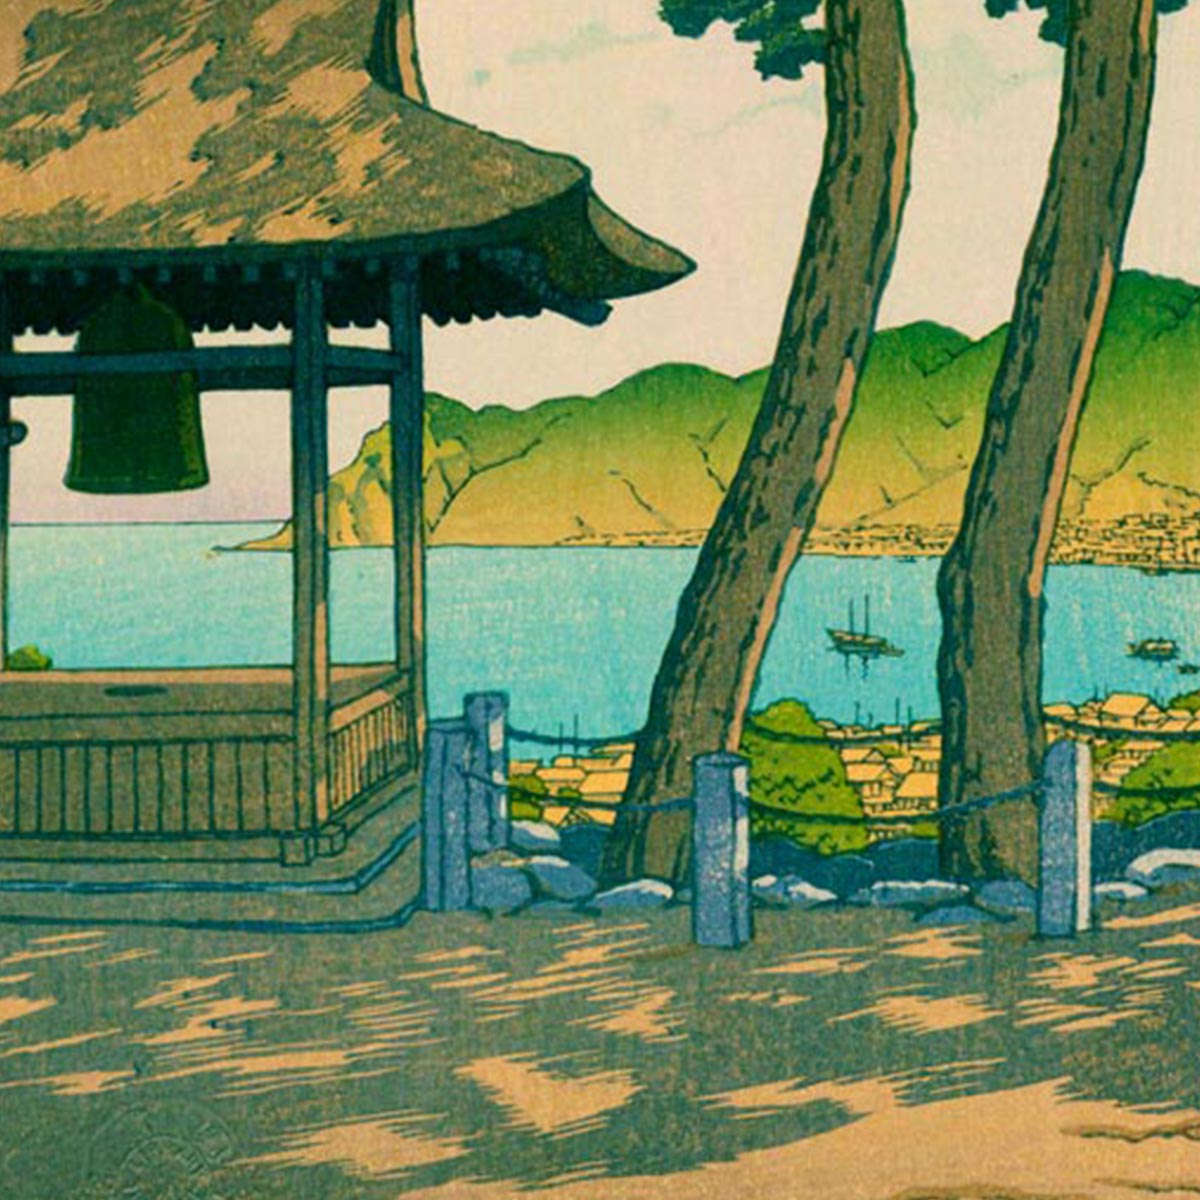 Shogetsuin Temple, Ito Art Print by Hasui